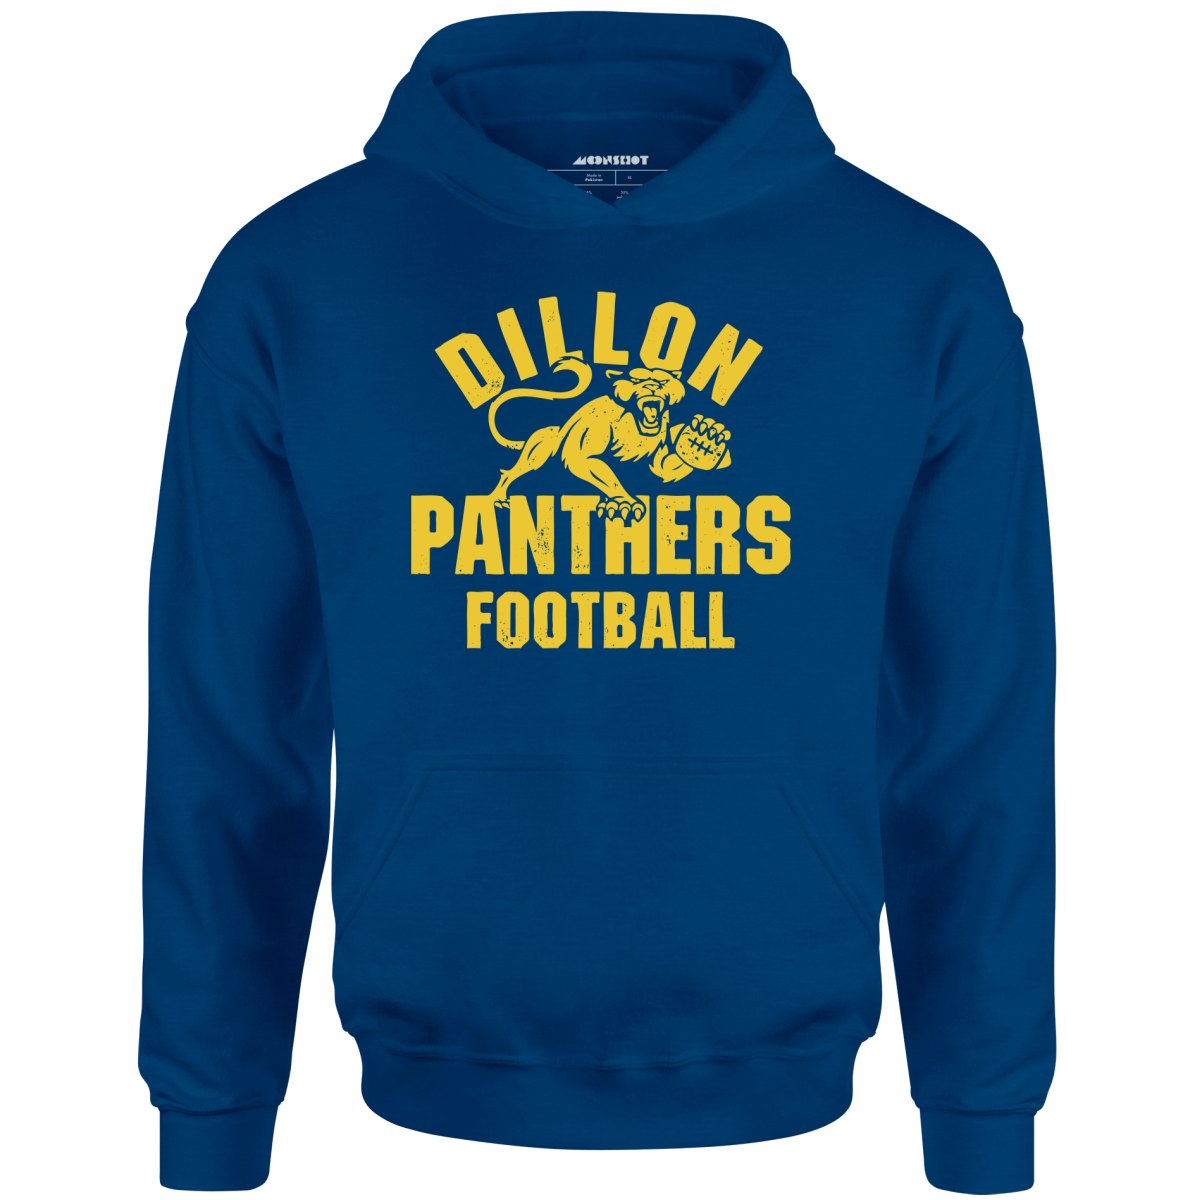 Dillon Panthers Football - Unisex Hoodie